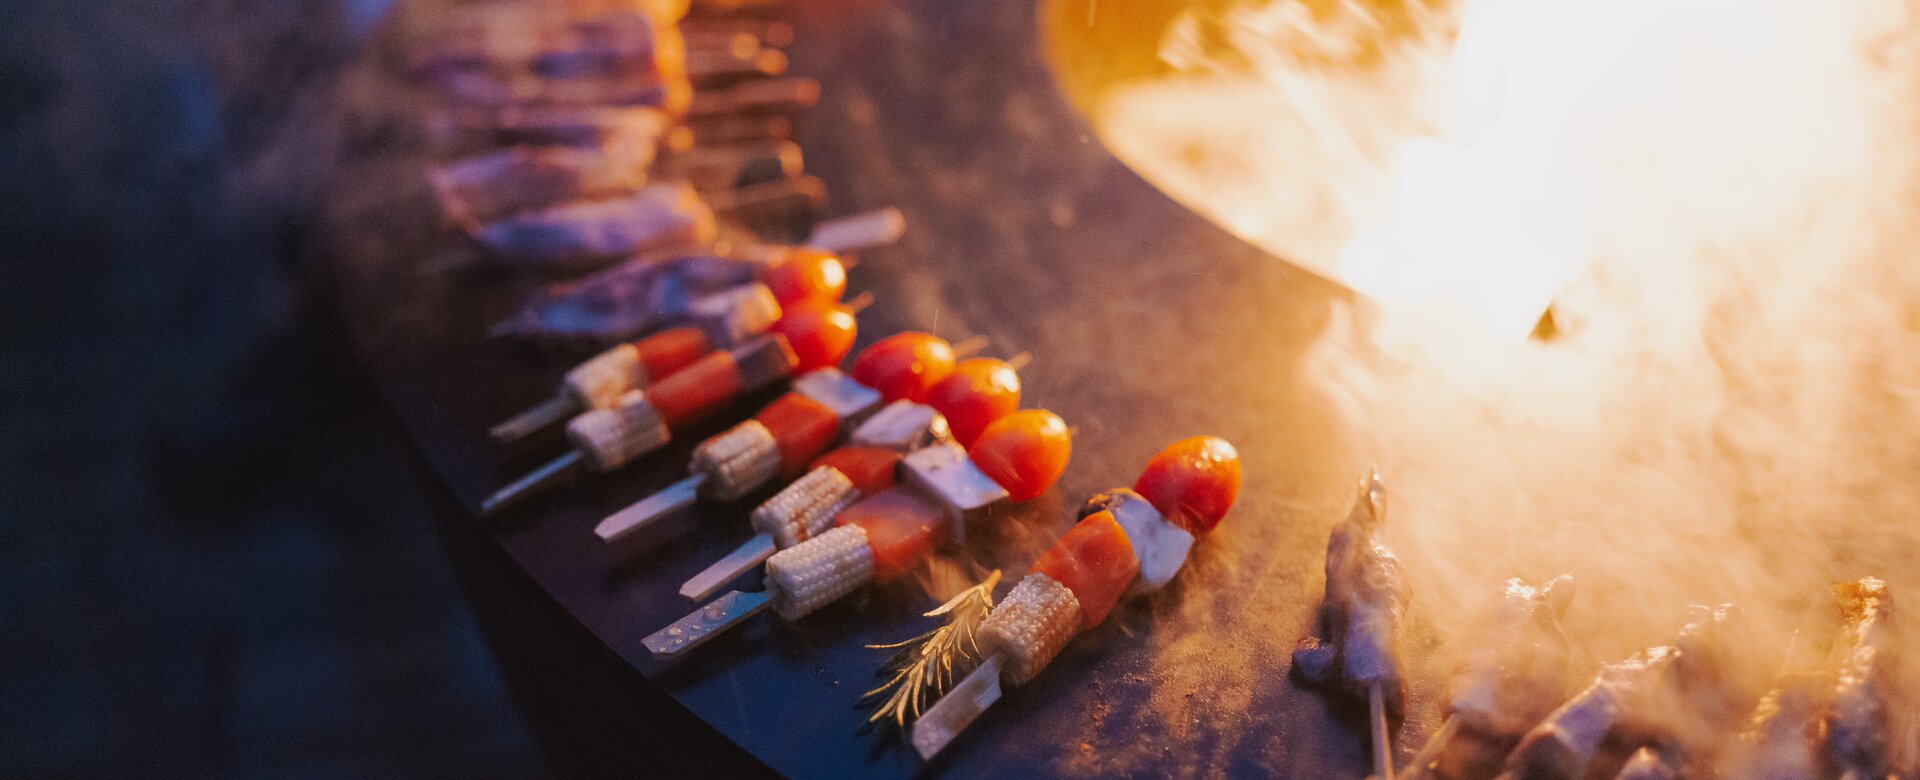 Skewers lie on a metal surface and an open fire can be seen in the centre | © Christian Schartner